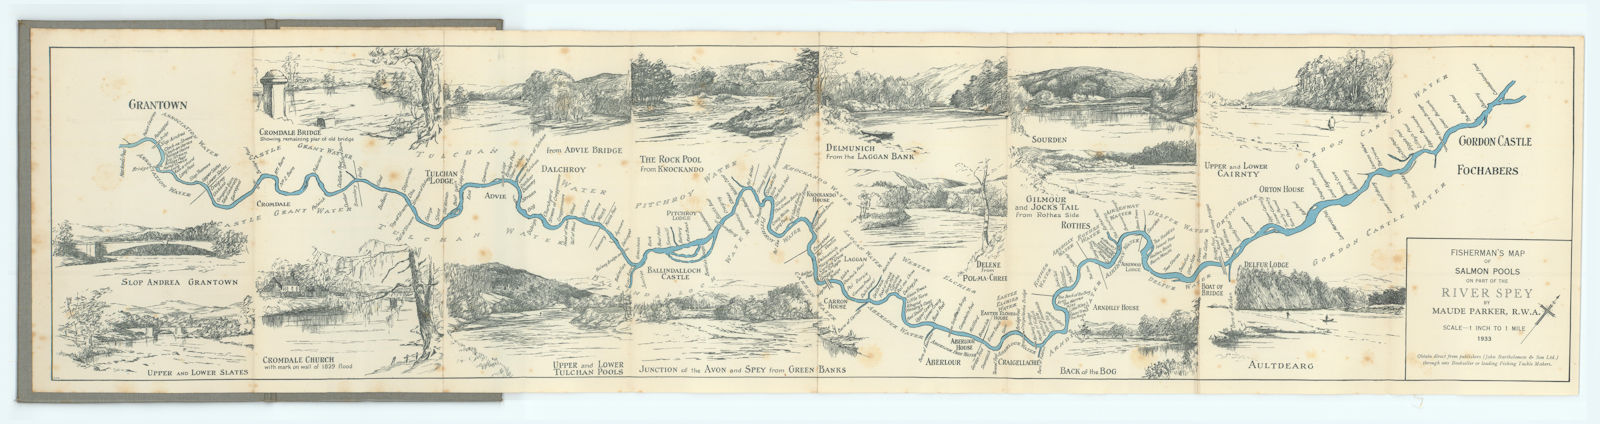 Fisherman's Map of Salmon Pools on part of the River Spey by Maude Parker 1933